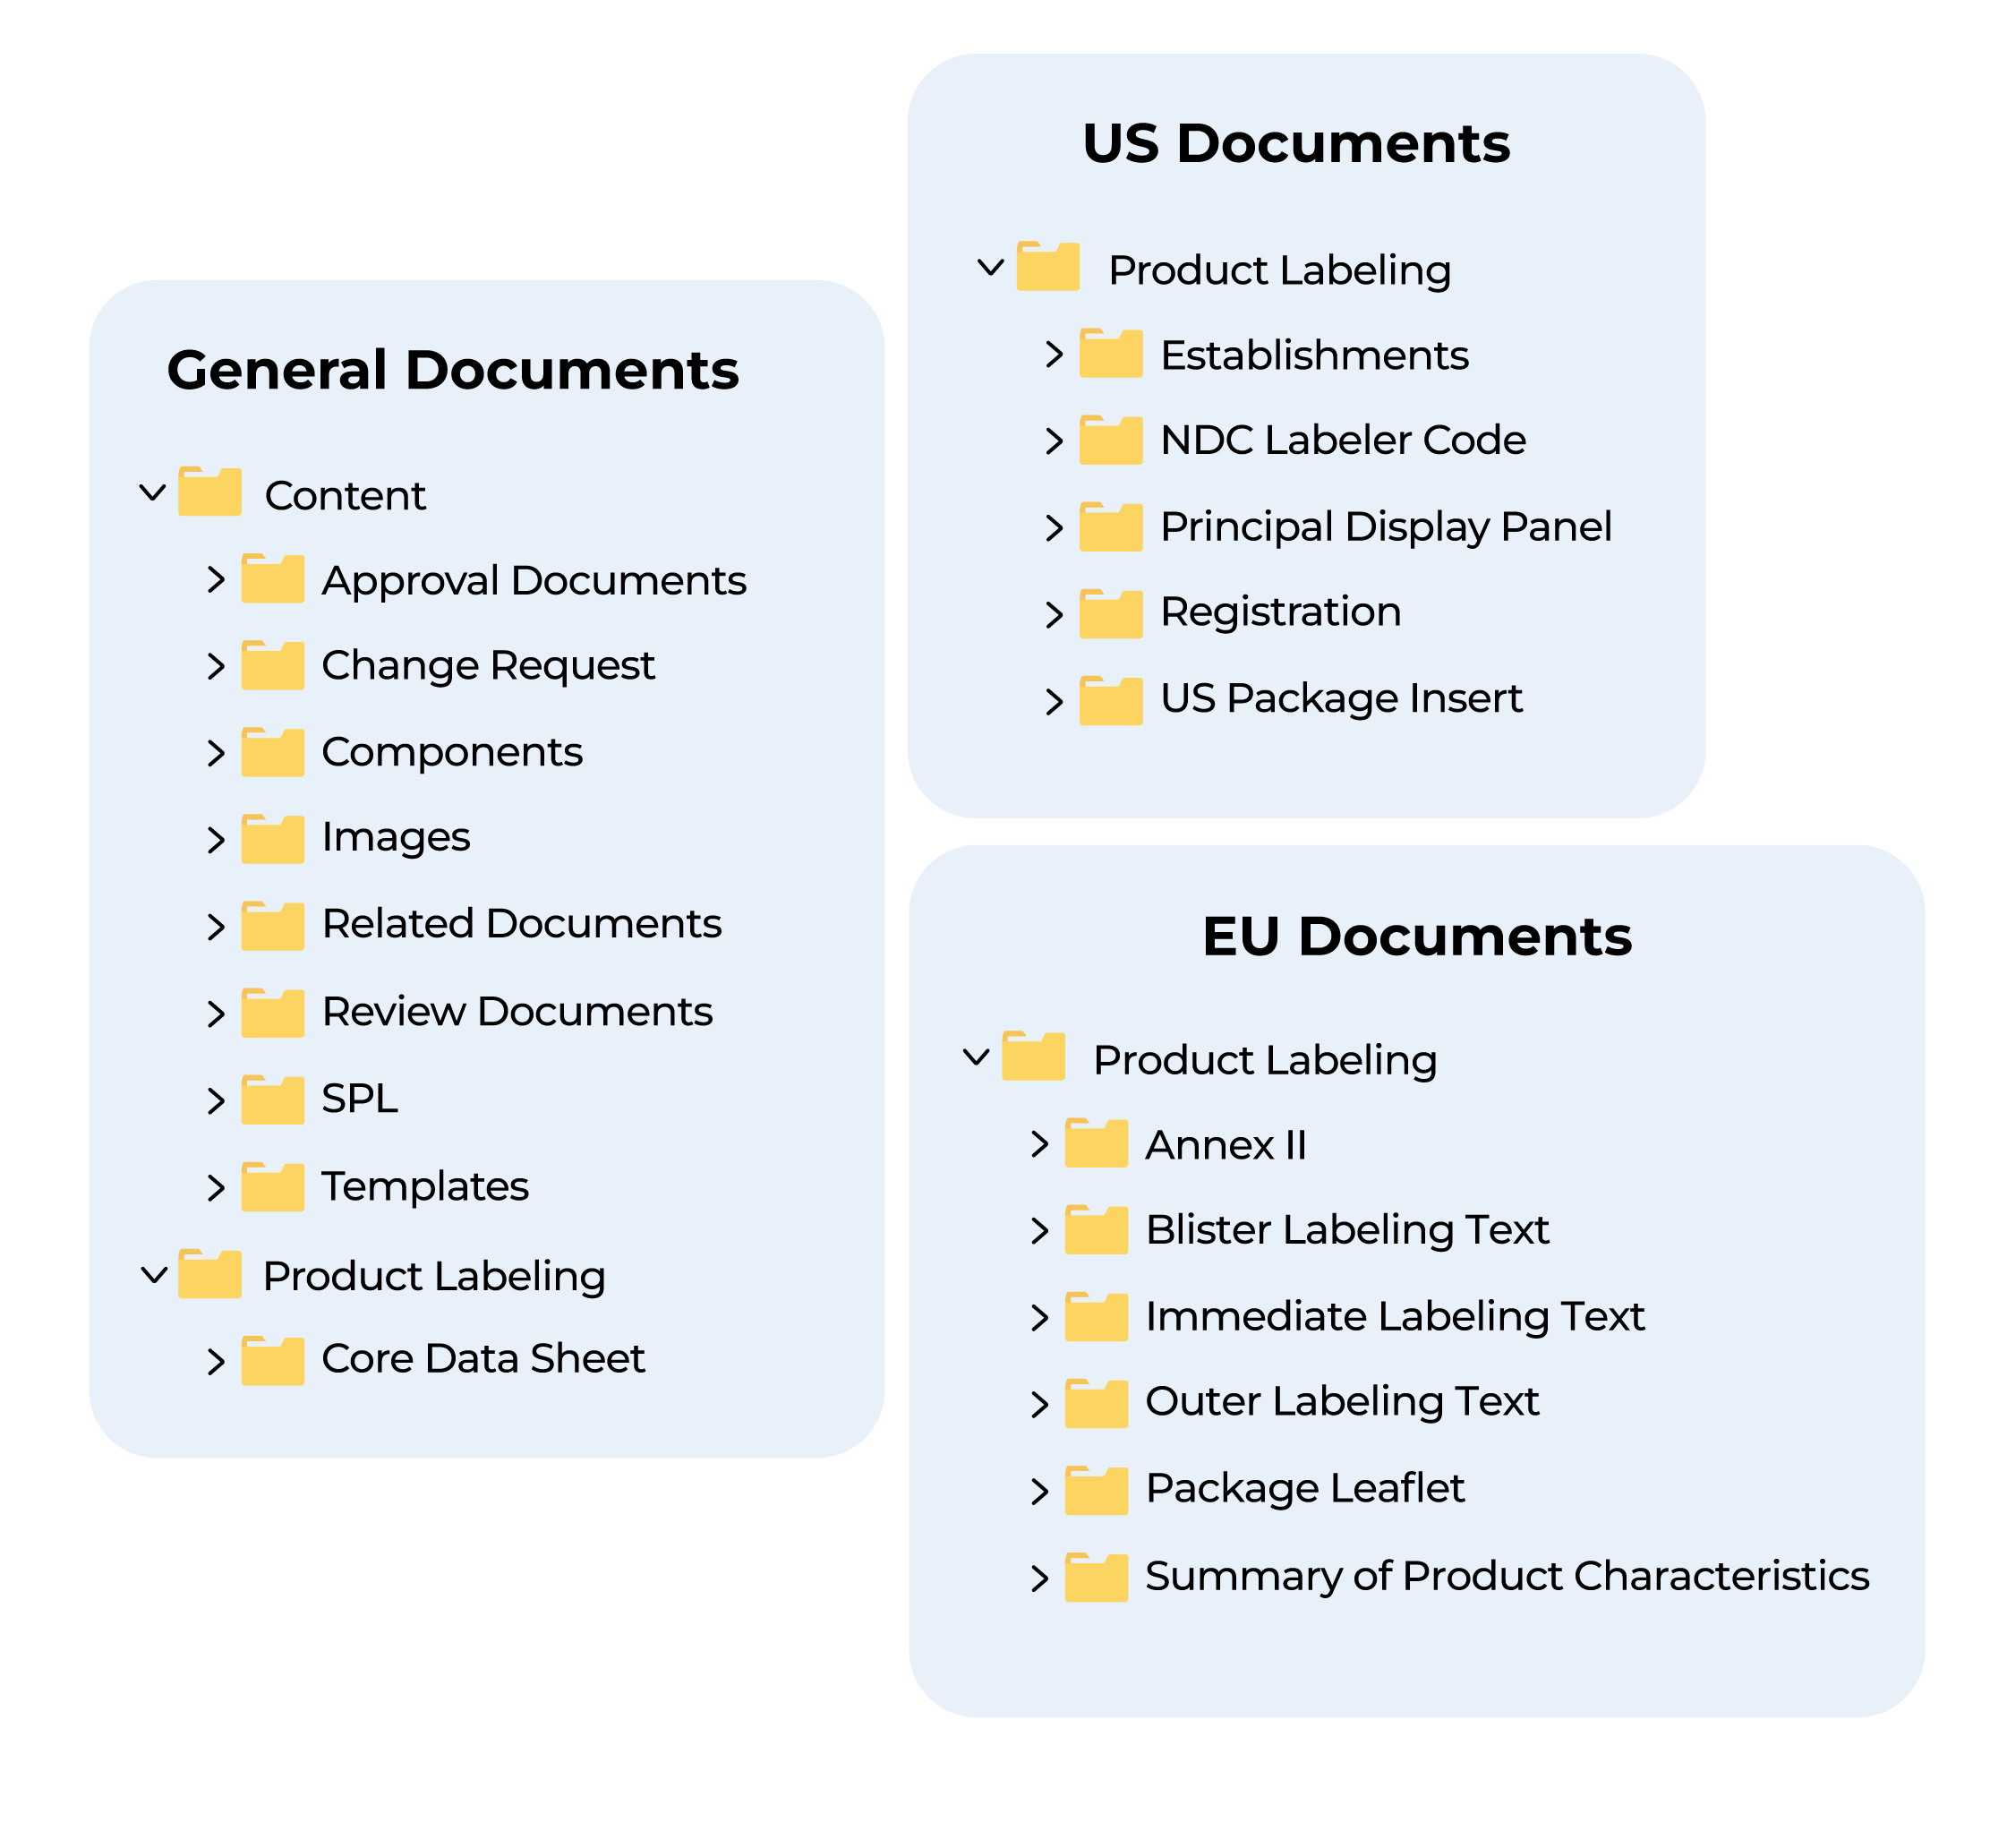 General Documents, US Documents and EU Documents